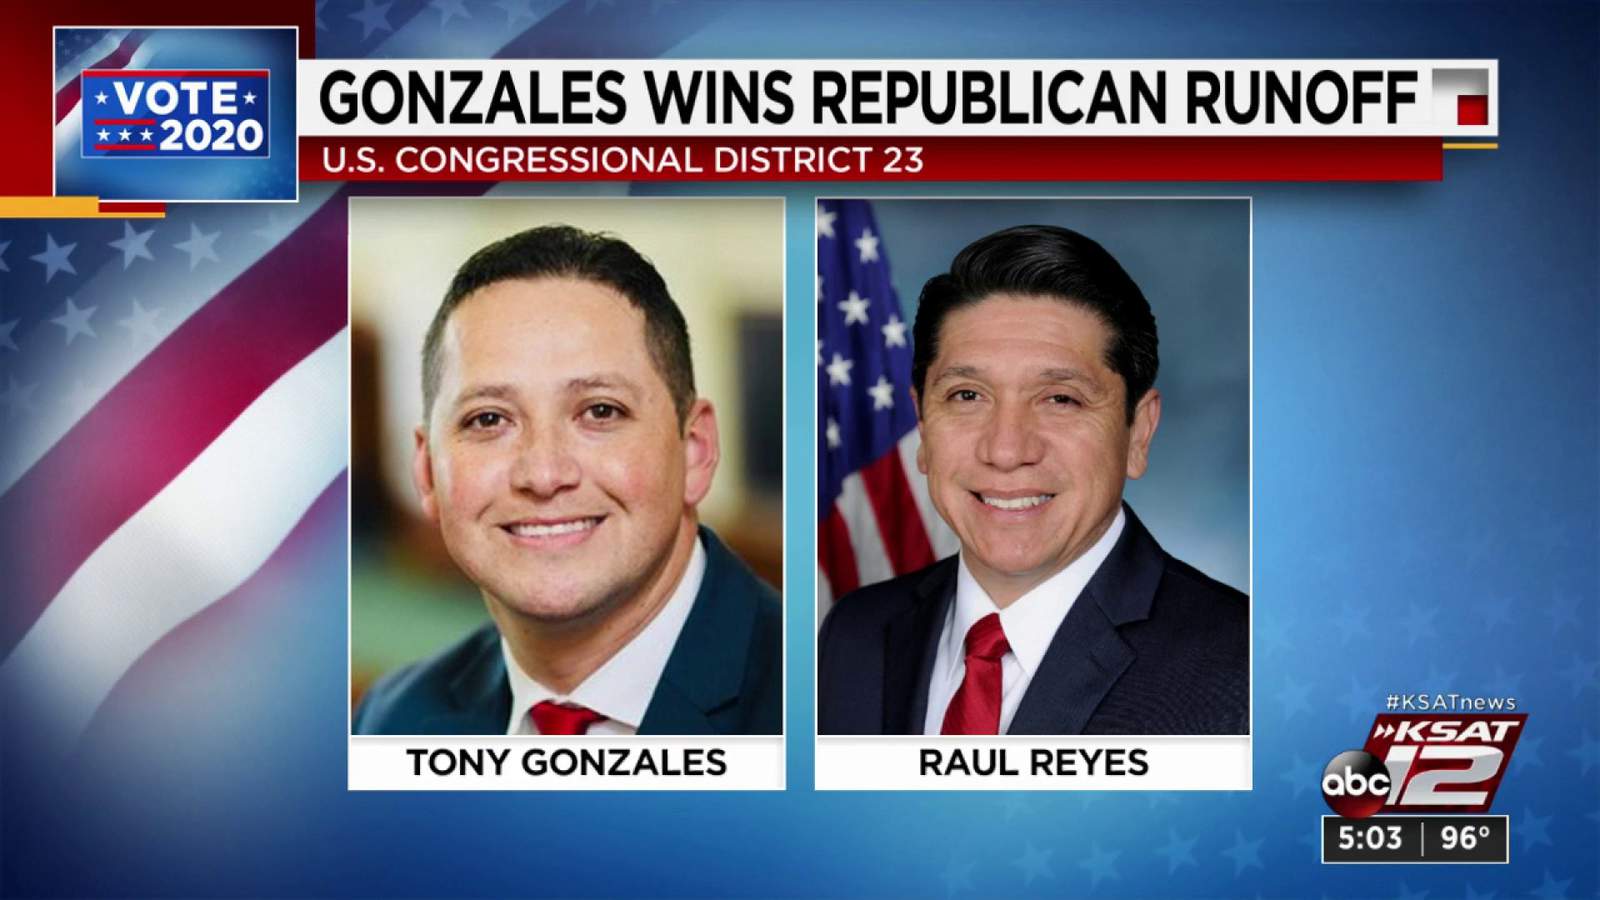 Tony Gonzales defeats Raul Reyes in District 23 runoff race by 46 votes, campaign says